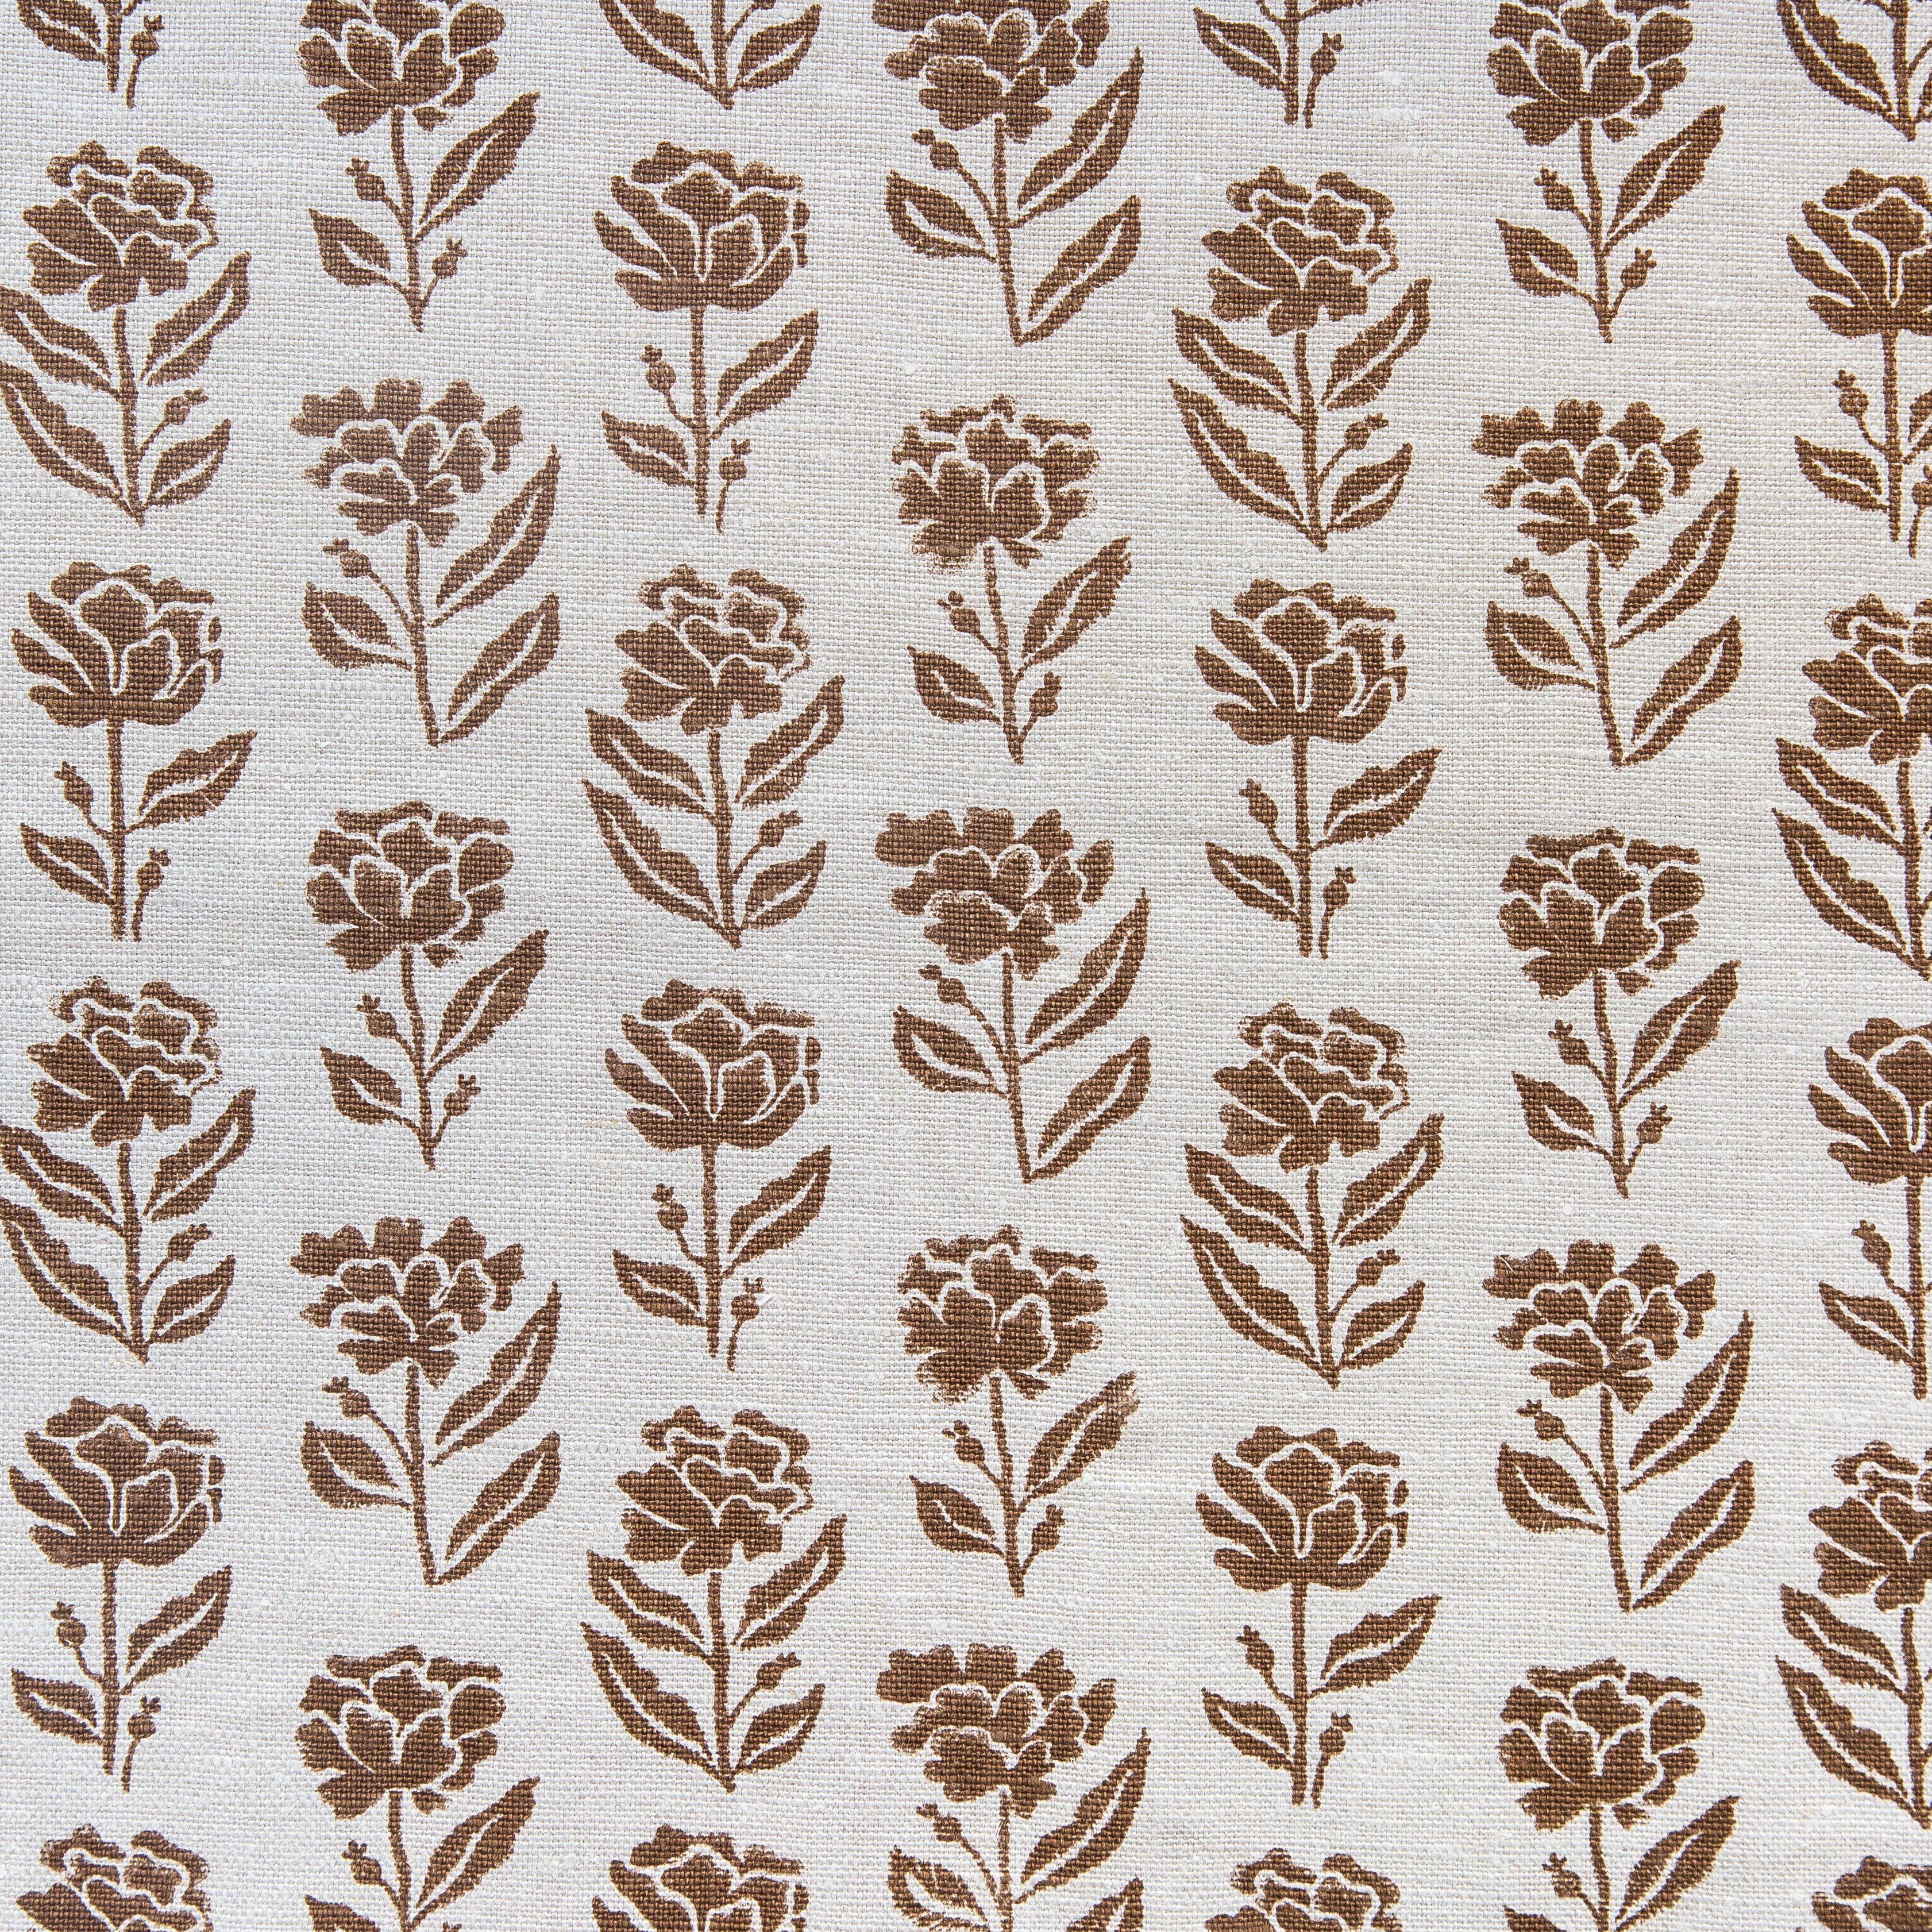 Detail of fabric in a classic floral print in brown on a cream field.